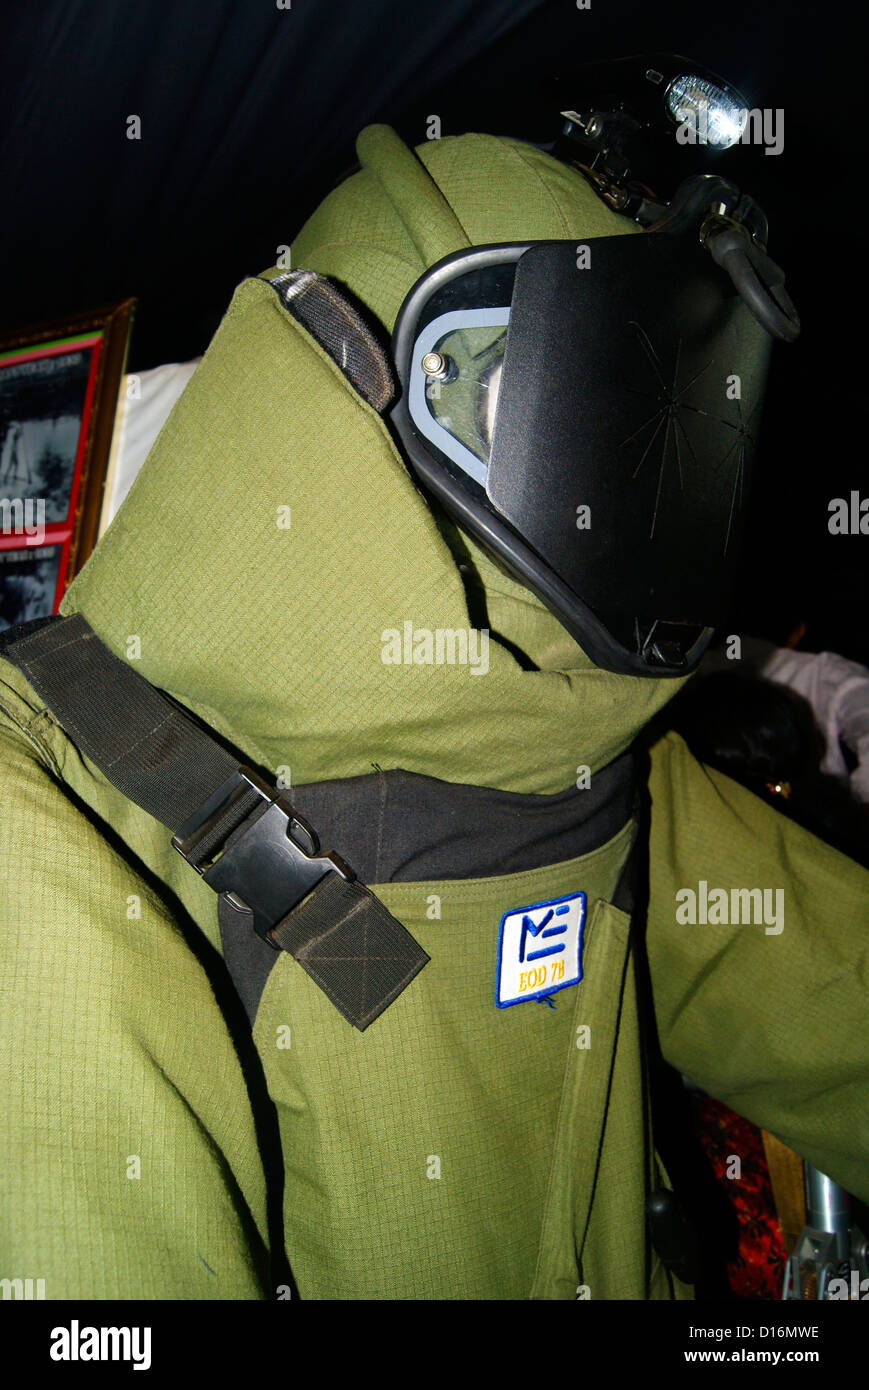 Bomb disposal suit and Helmet closeup view of Indian Army Stock Photo